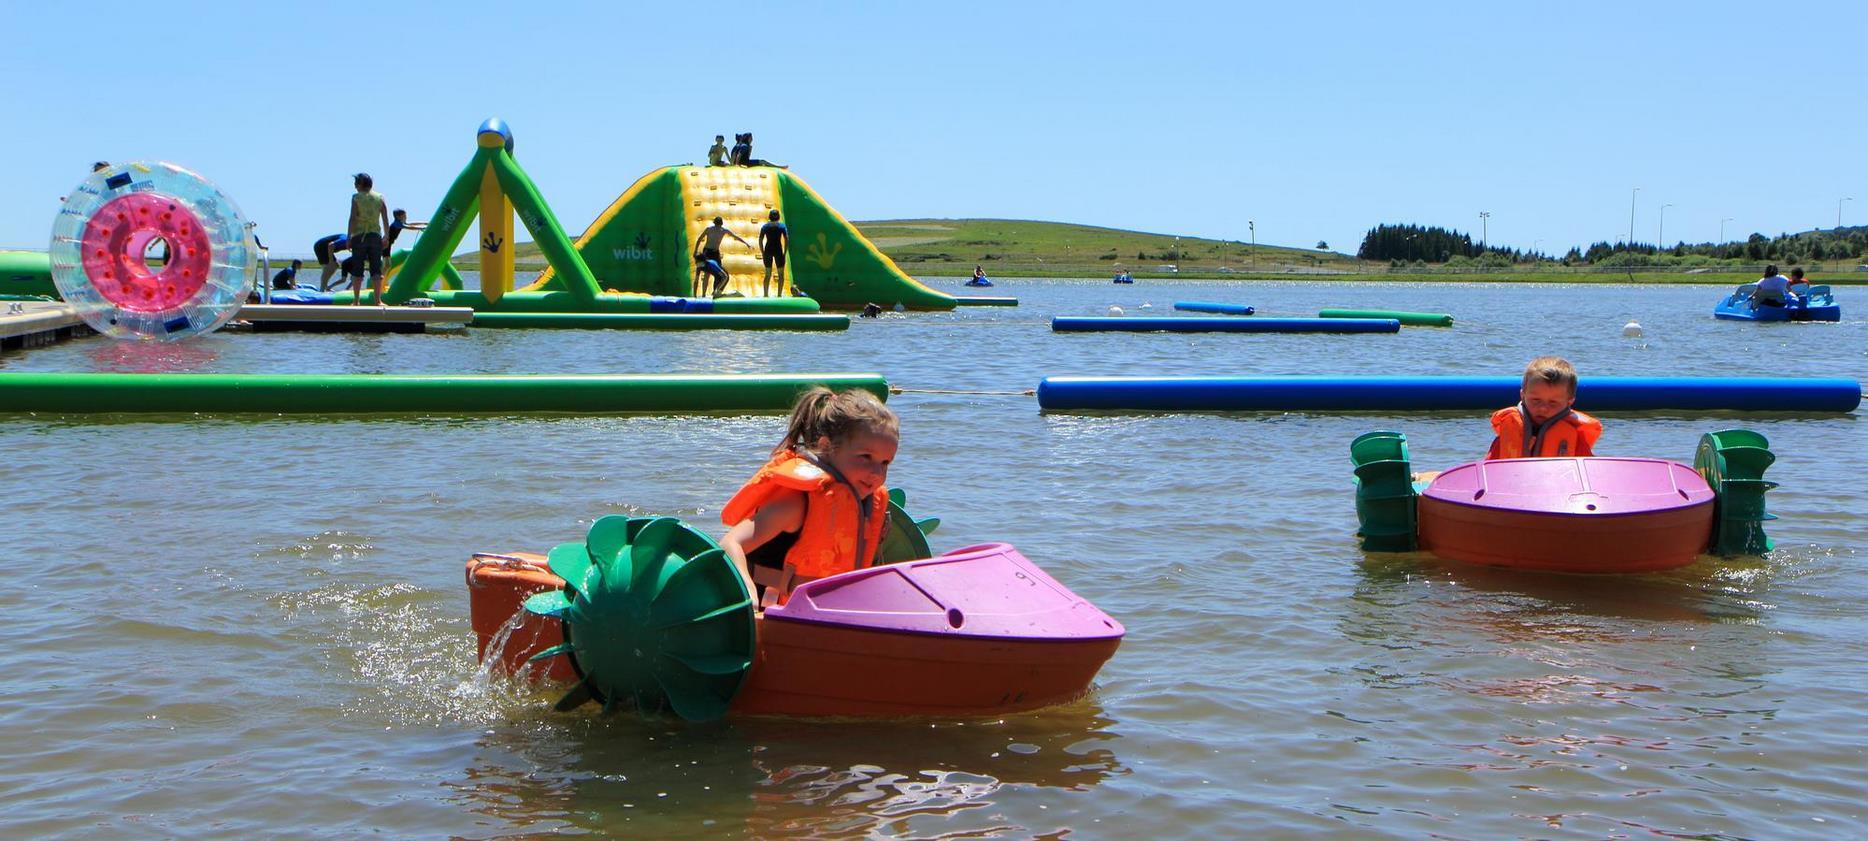 Pedalos for the little ones - Super Besse - Lac des Hermines